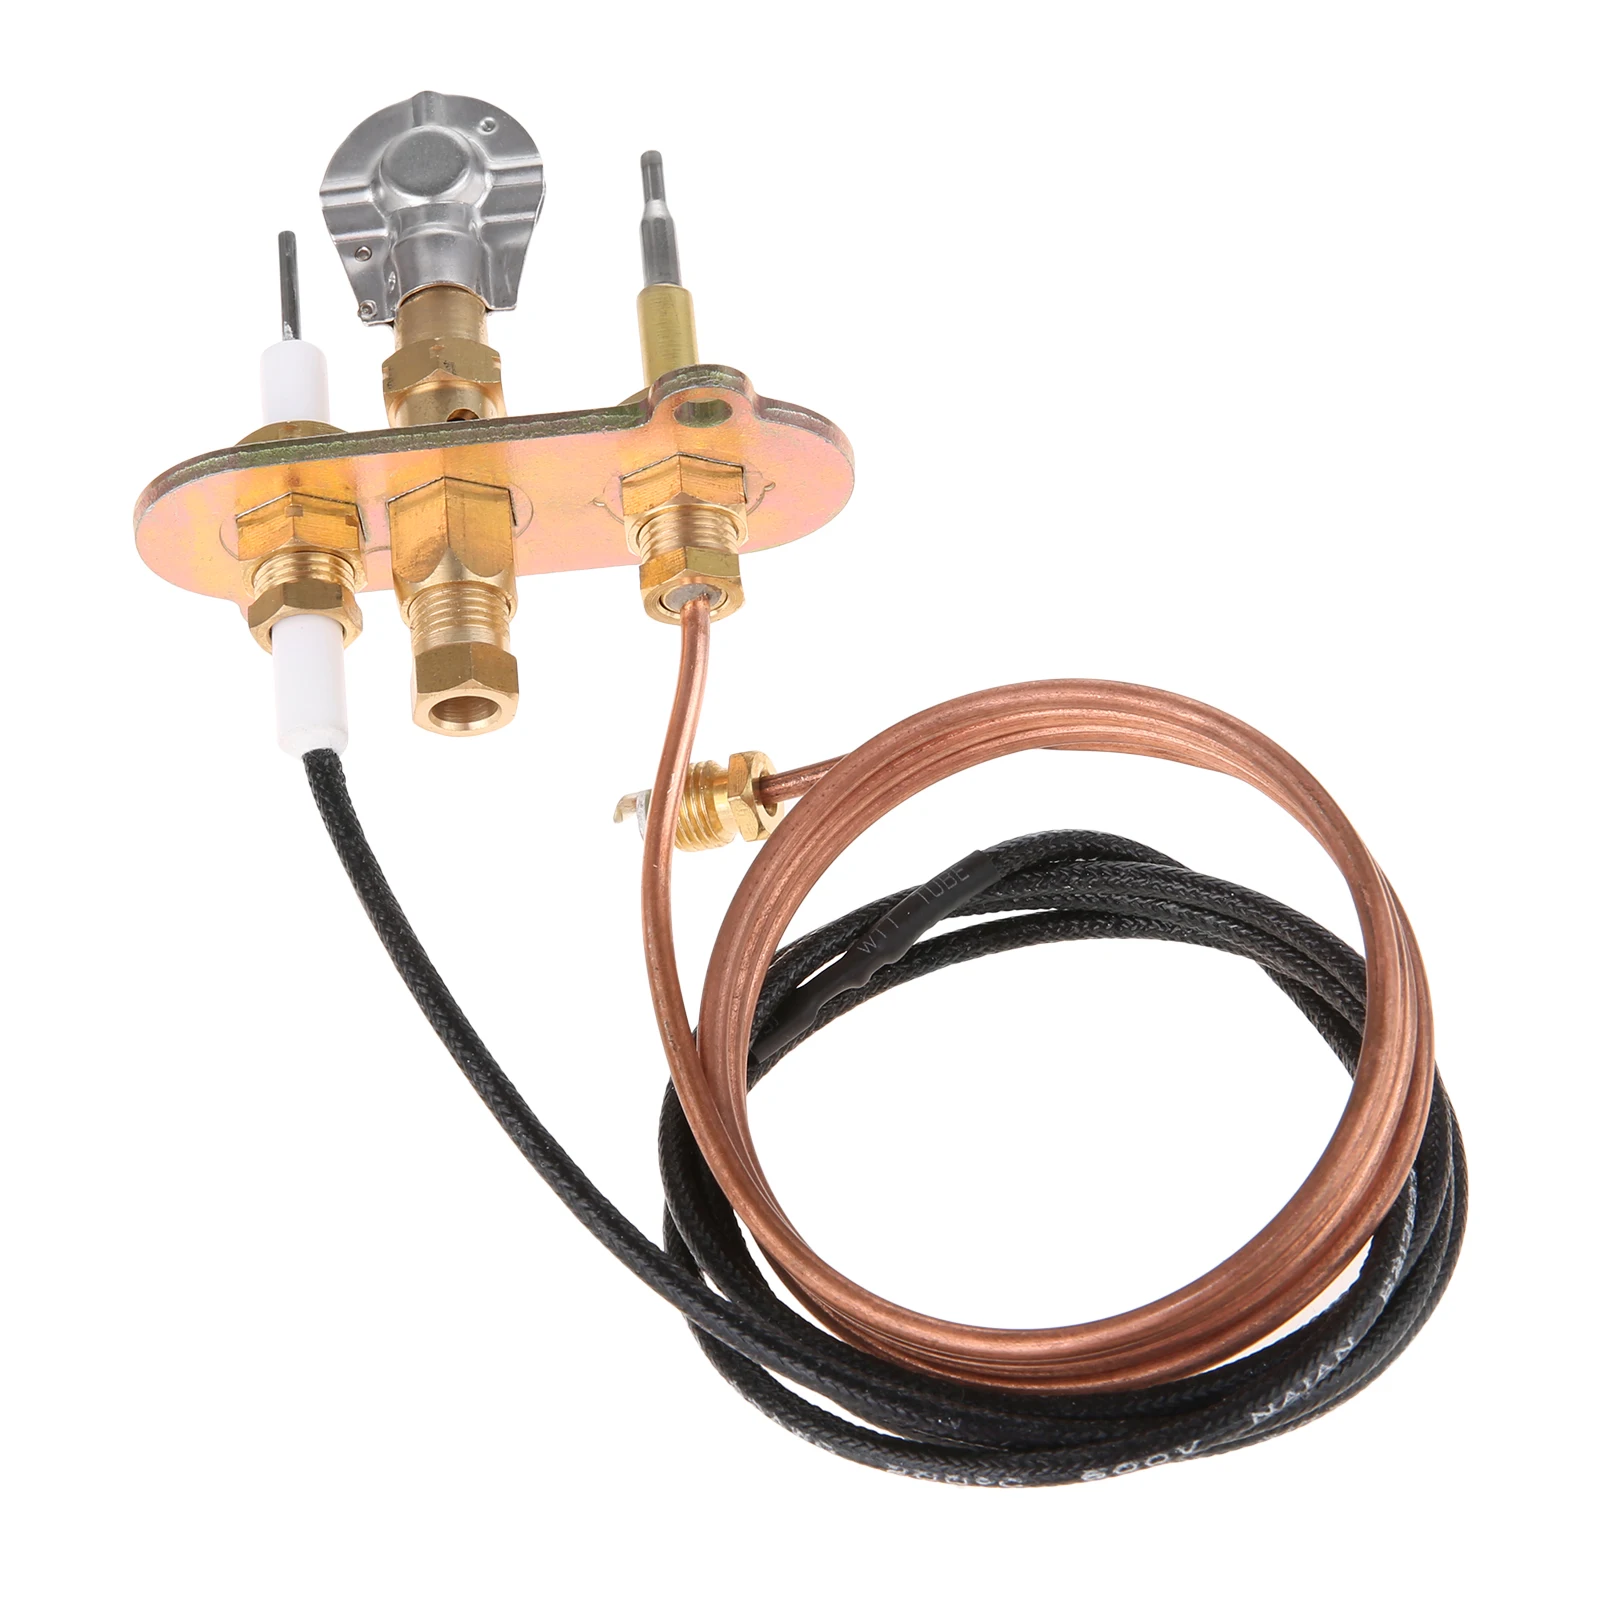 Liquefied Gas M8*1 Thermocouple and Ignition 900mm Pilot Burner kit for Fireplace/Thermocouple Gas Water Heater Parts